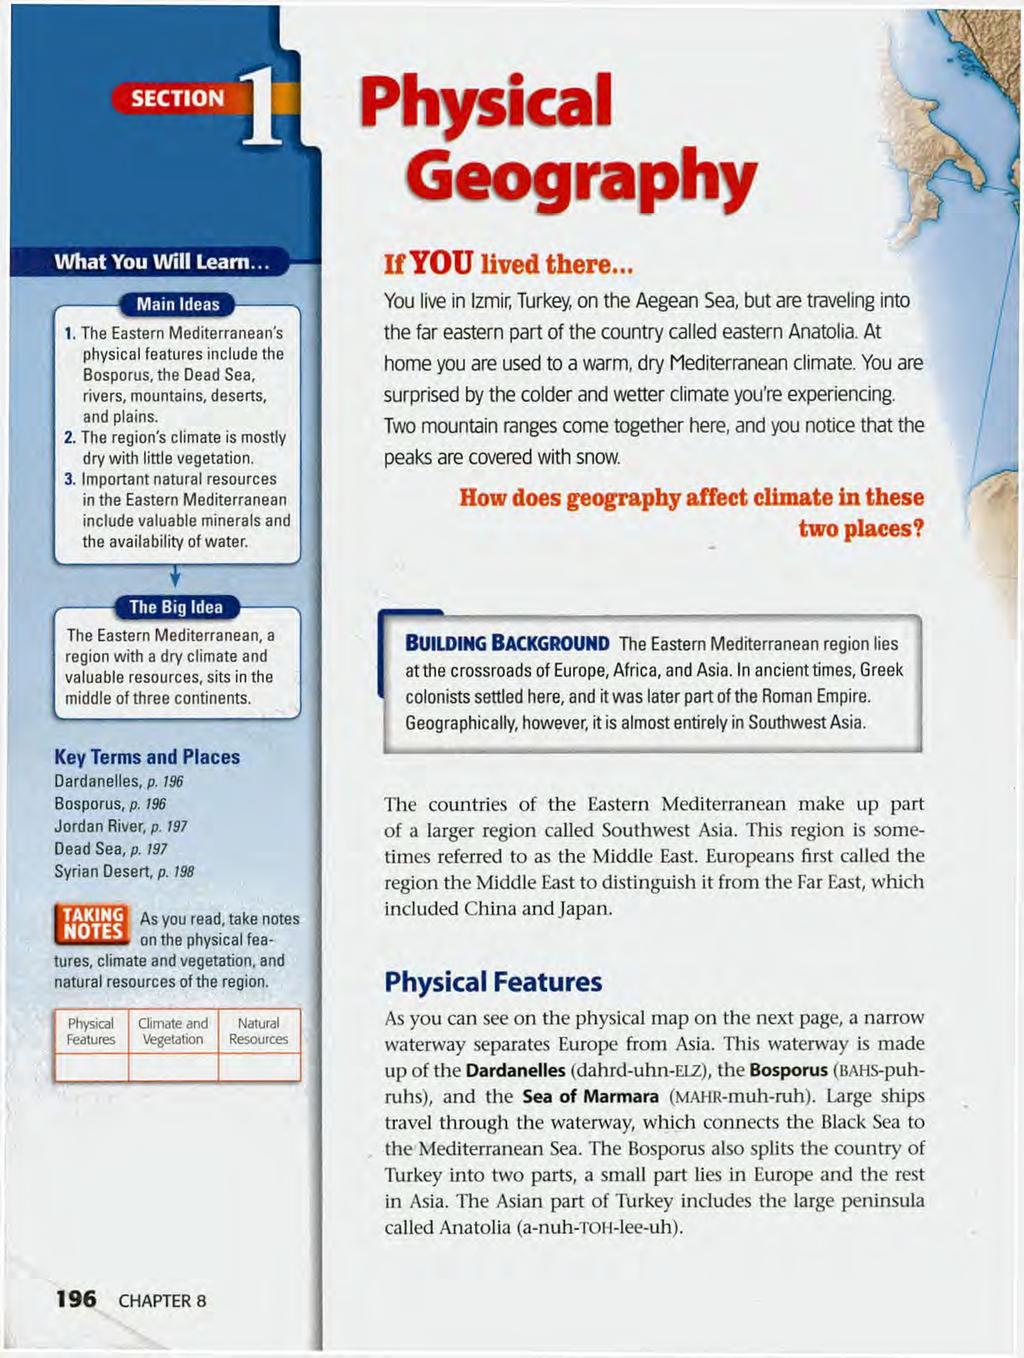 SECTION Physical Geography W h at You W ill Learn..., -------------- 1. The Eastern Mediterranean's physical features include the Bosporus, the Dead Sea, rivers, mountains, deserts, and plains. 2.